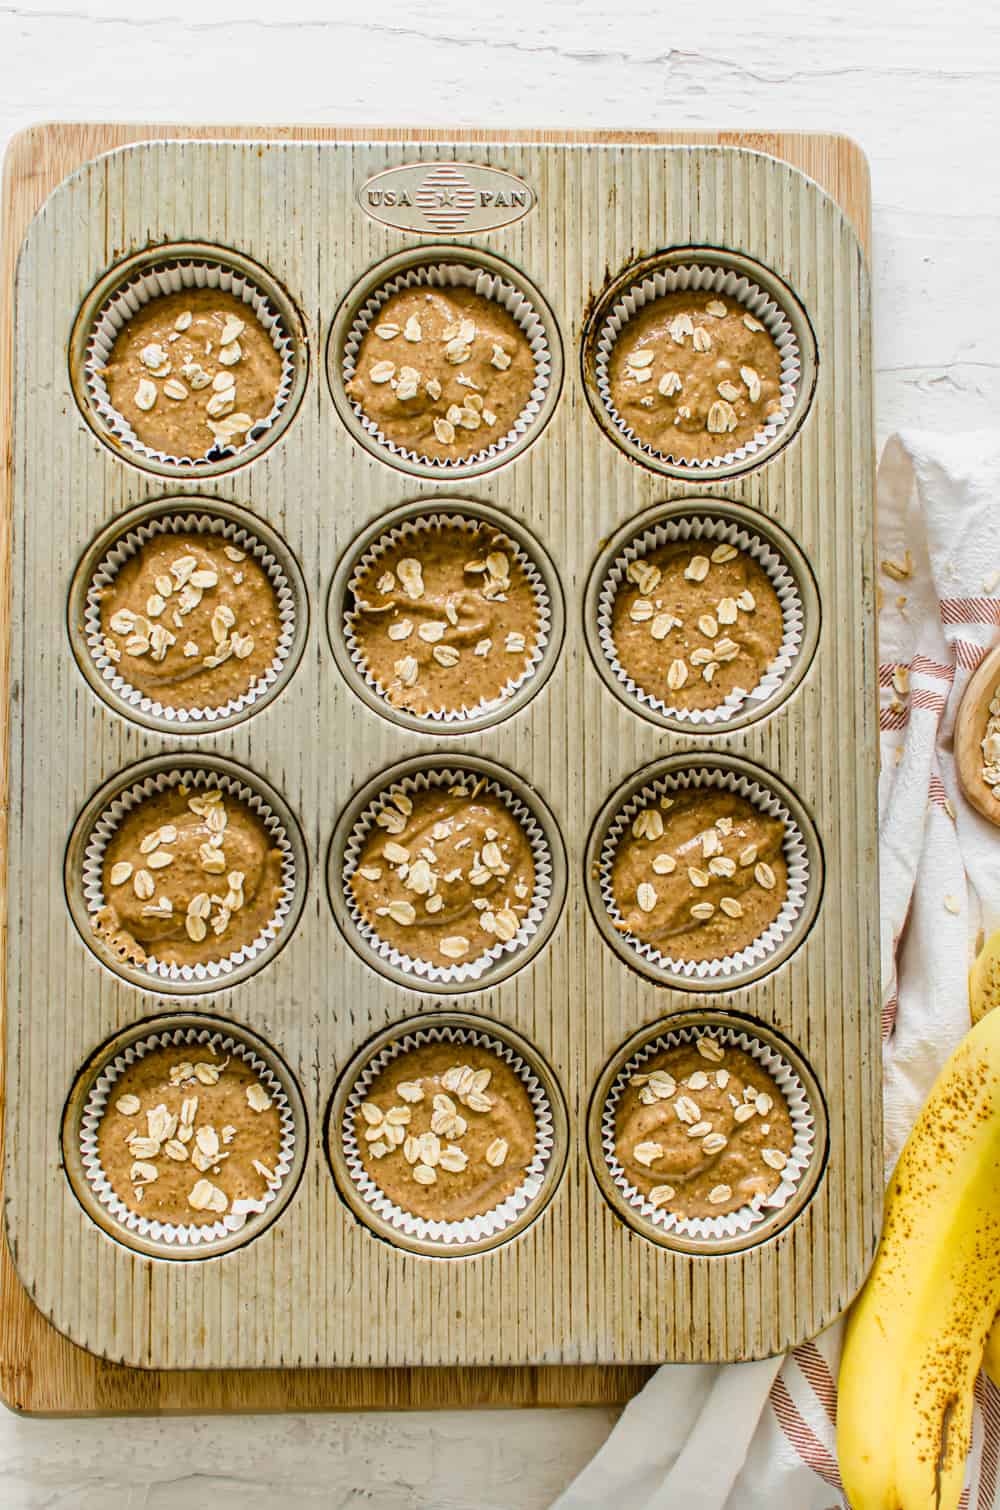 Gluten-free banana muffin batter in a muffin tin with oats sprinkled on top.